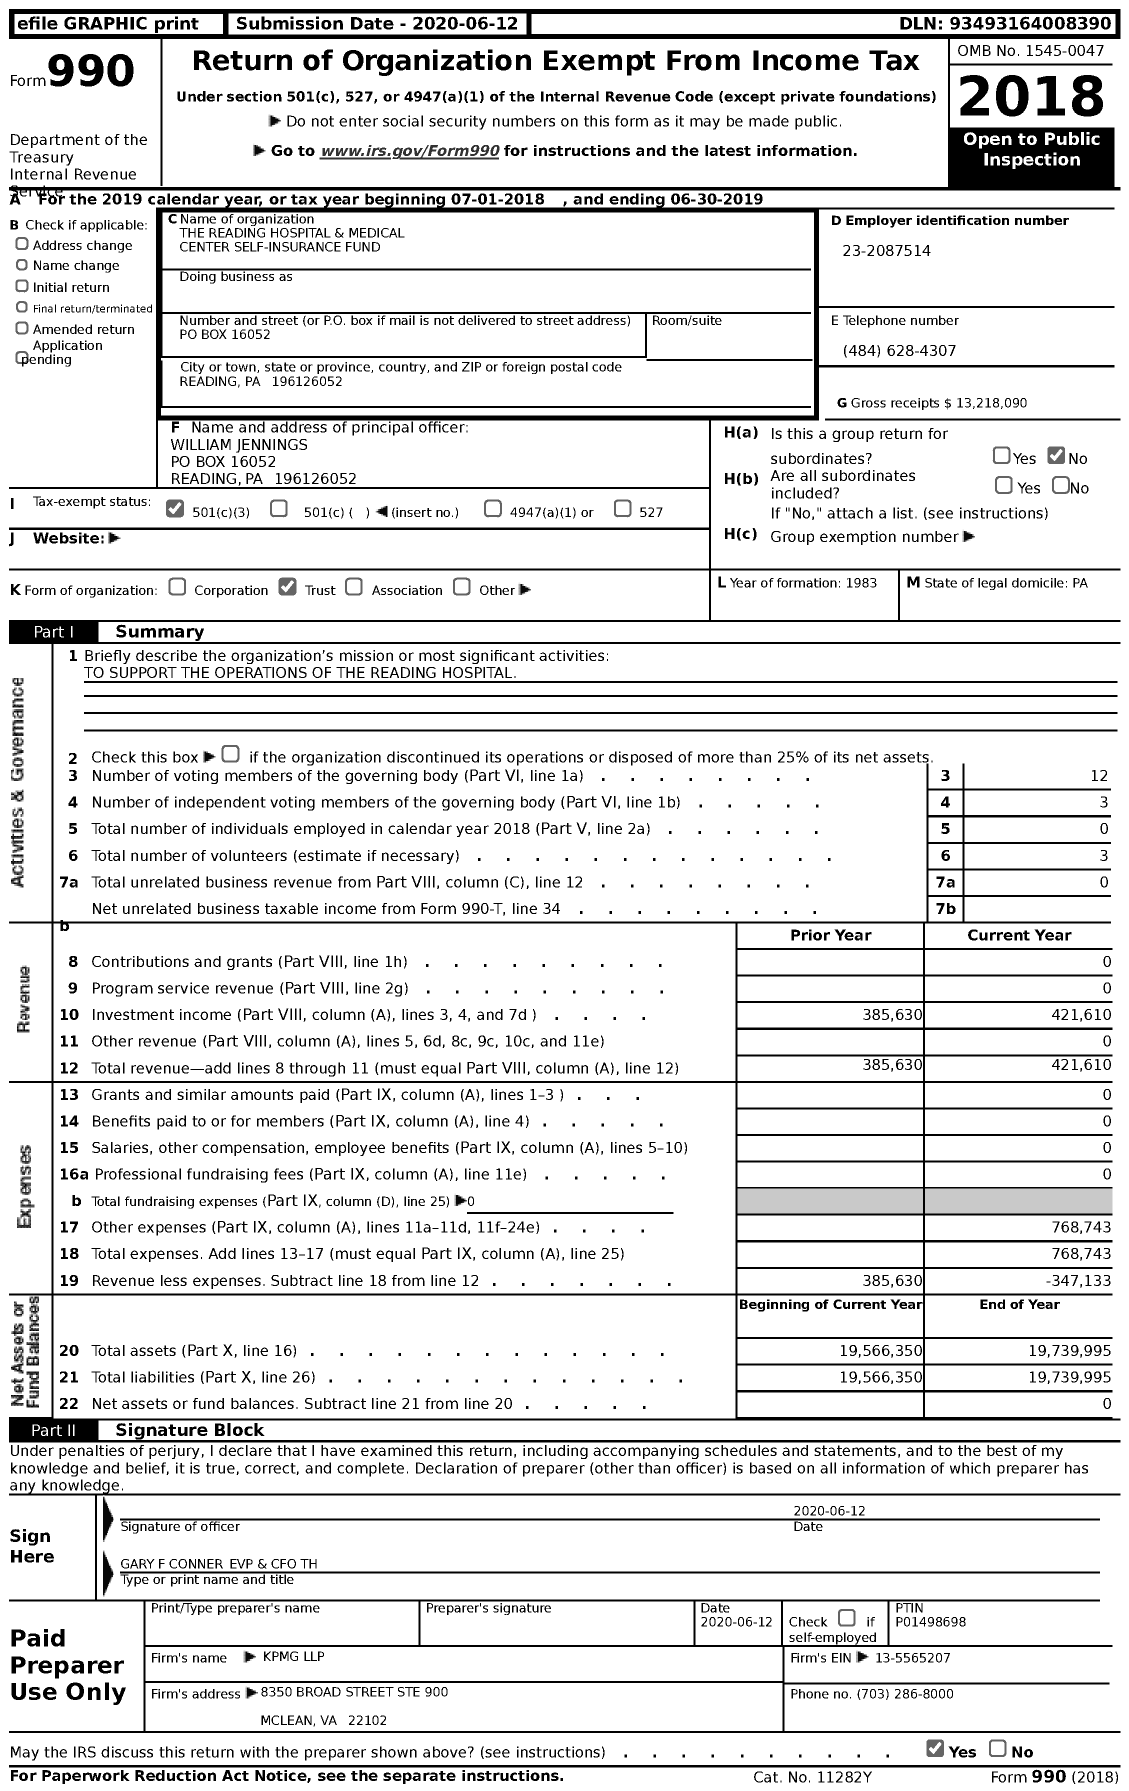 Image of first page of 2018 Form 990 for The Reading Hospital and Medical Center Self-Insurance Fund